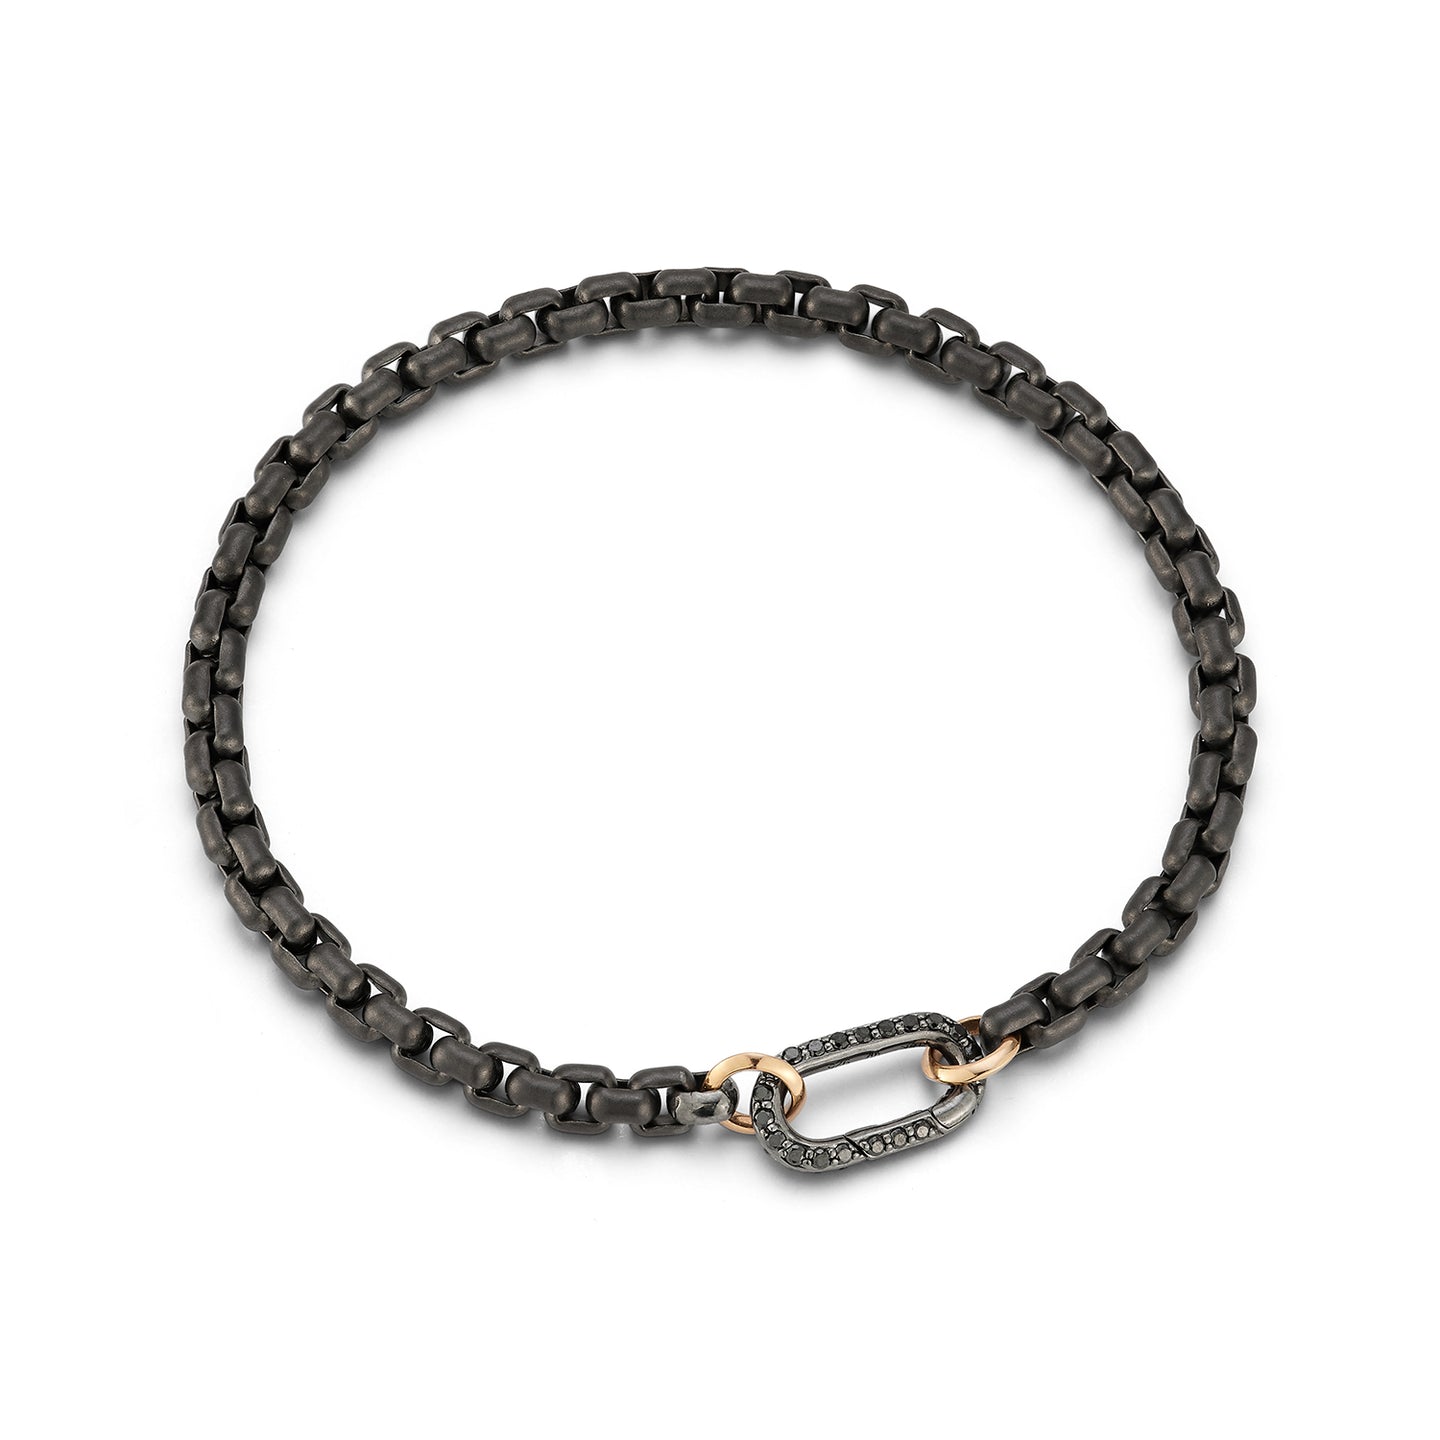 SAXON STERLING SILVER CHAIN LINK BRACELET WITH 18K BLACK GOLD AND BLACK DIAMOND ELONGATED CLASP